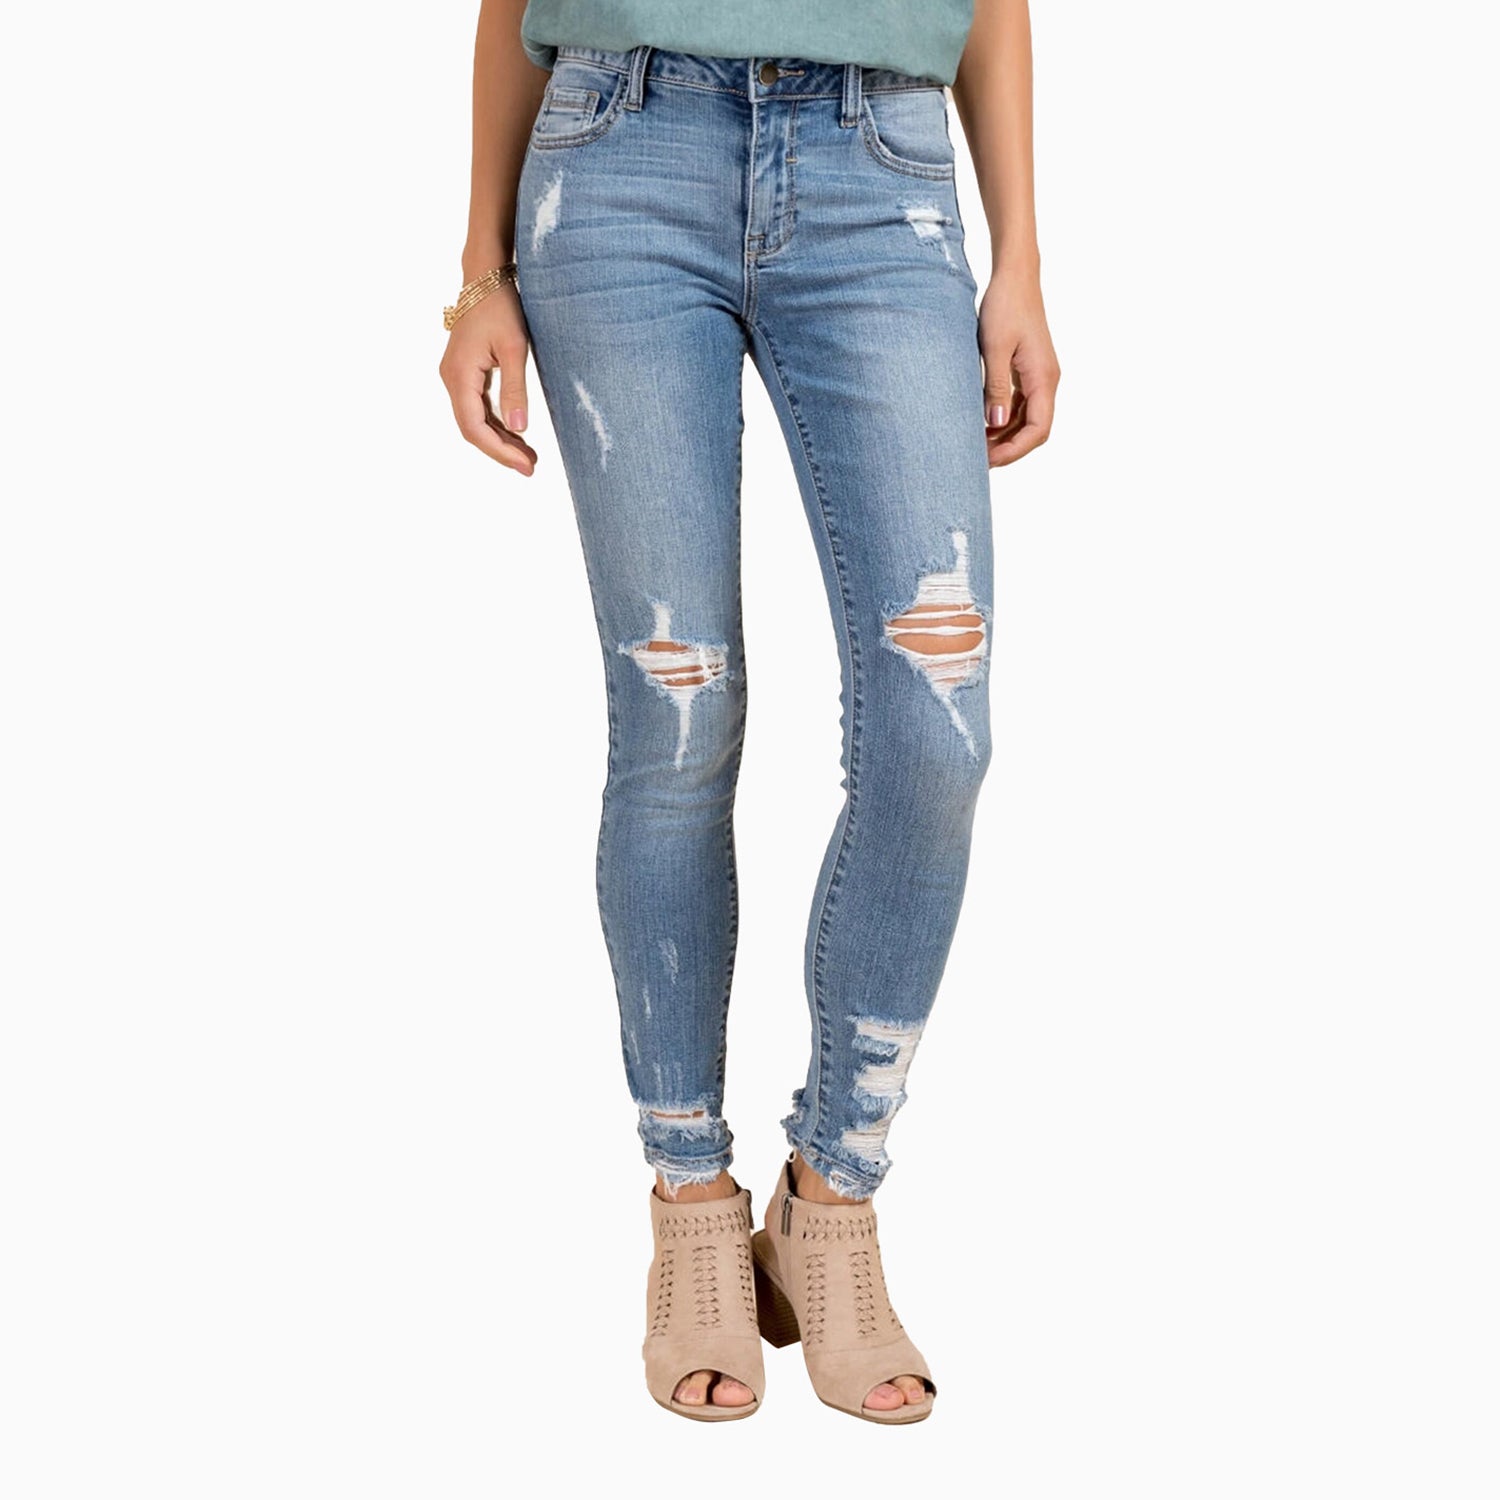 cello-jeans-womens-mid-rise-destroy-crop-skinny-pant-wv15329md